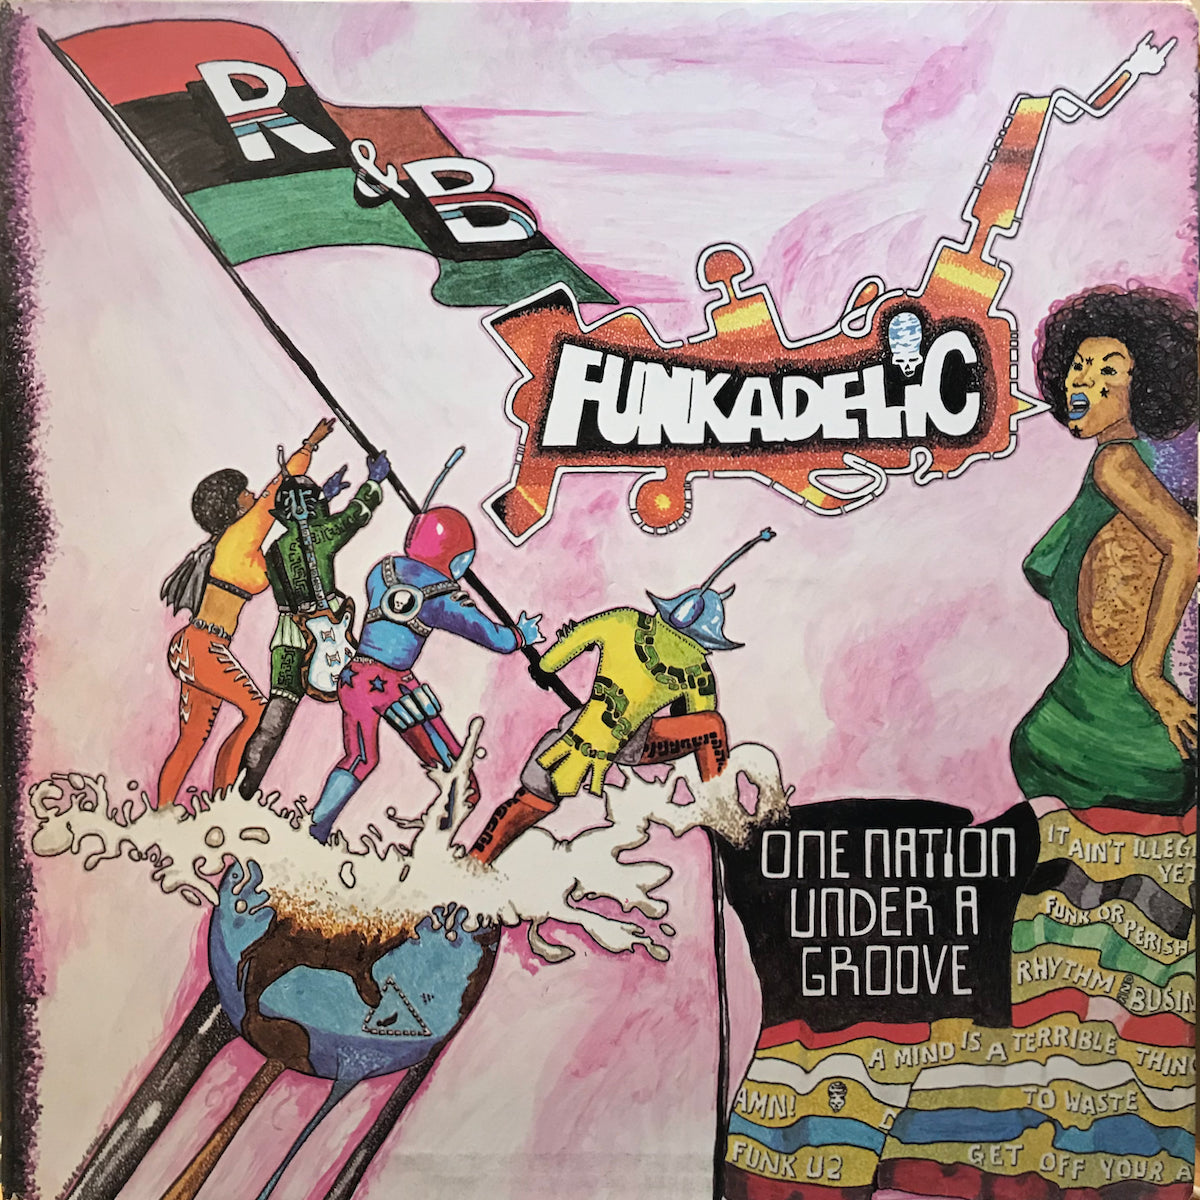 Funkadelic / One Nation Under A Groove | VINYL7 RECORDS